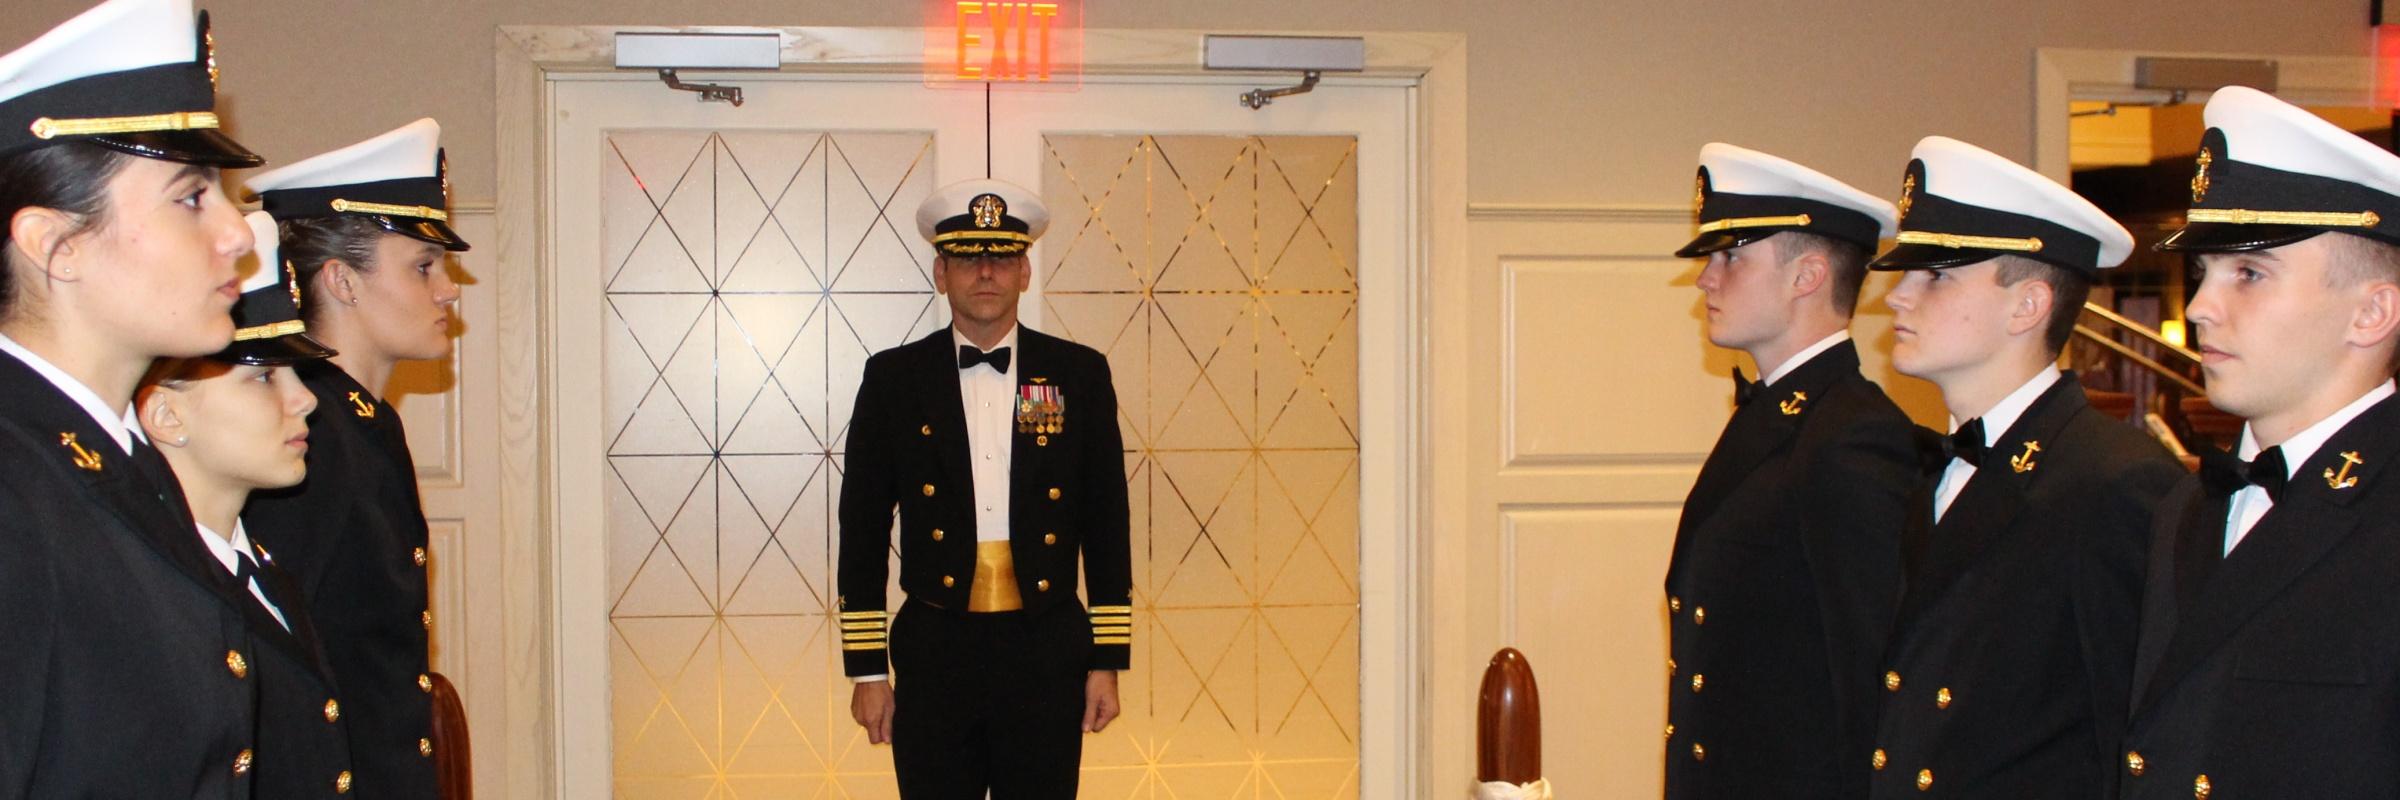 Captain Paul De Marcellus prepares to make his official entry into the military ball, with a group of midshipmen in dress uniforms standing at the ready to salute upon entry.